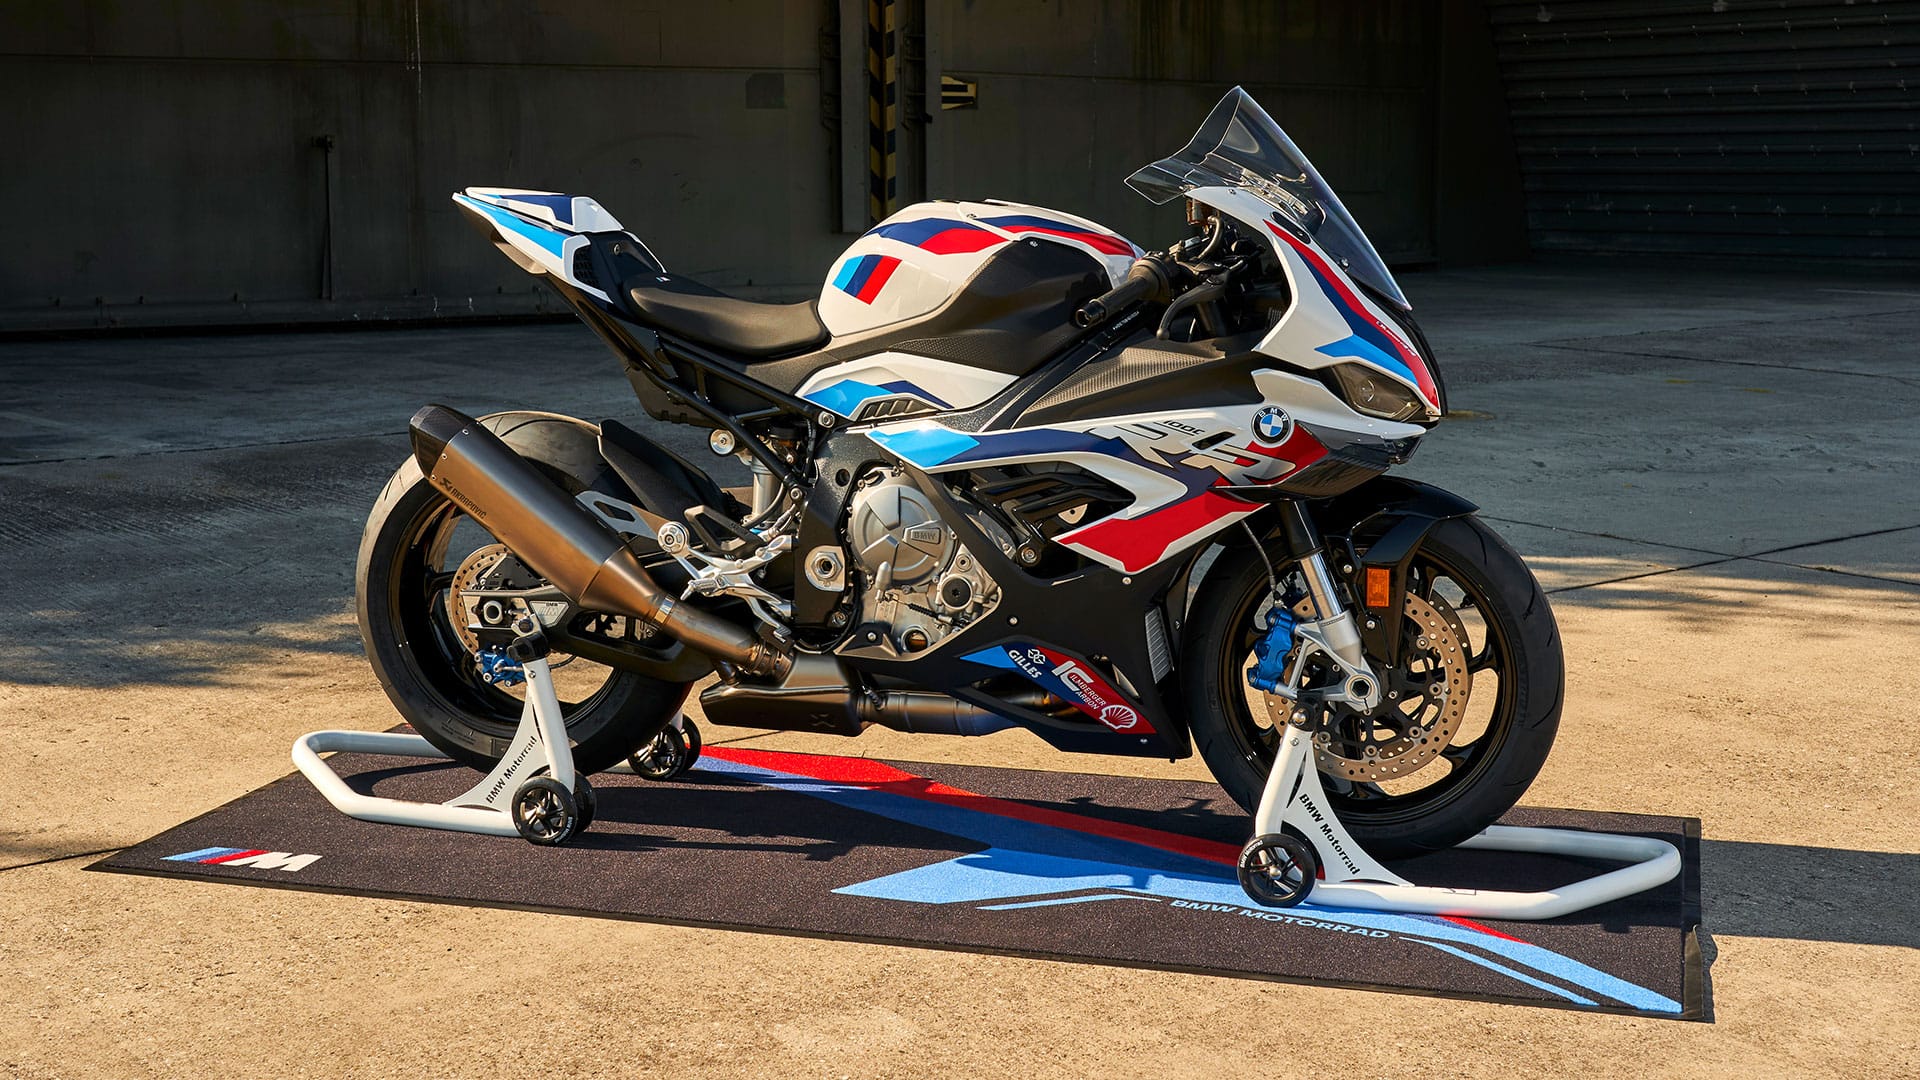 Mr Vikram Pawah, Presidenr of BMW Group India said, &quot; With the new BMW M 1000 RR, BMW Motorrad has set a new milestone in the field of superbikes. This new BMW stands for absolute performance and exclusivity down to the last detail and is built for those who are driven by passion.&quot;